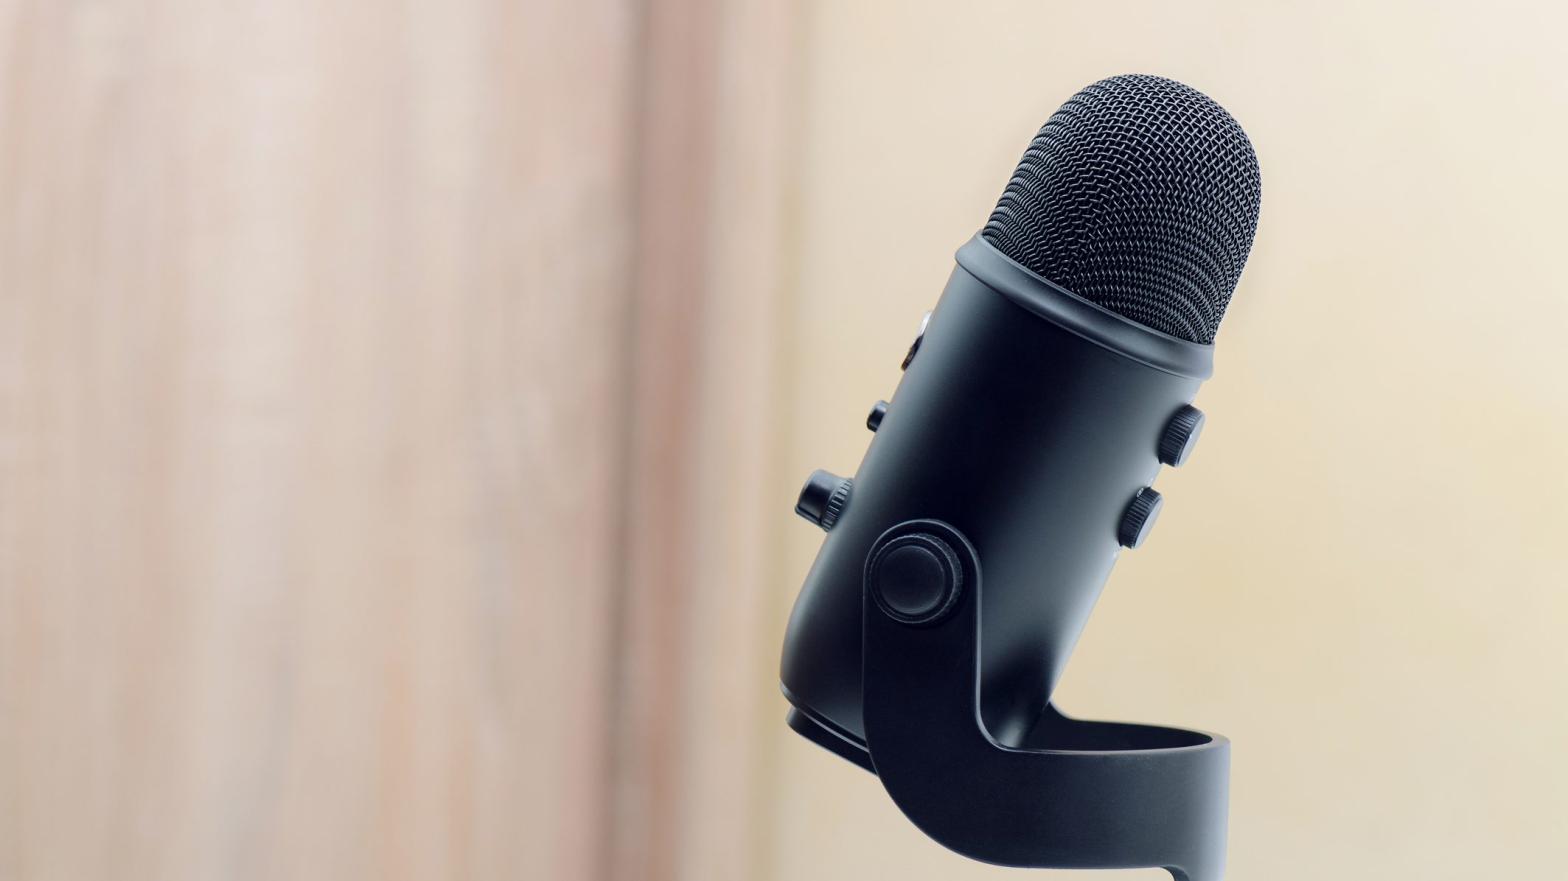 Black Microphone On Wooden Background With Soft Blue Effect